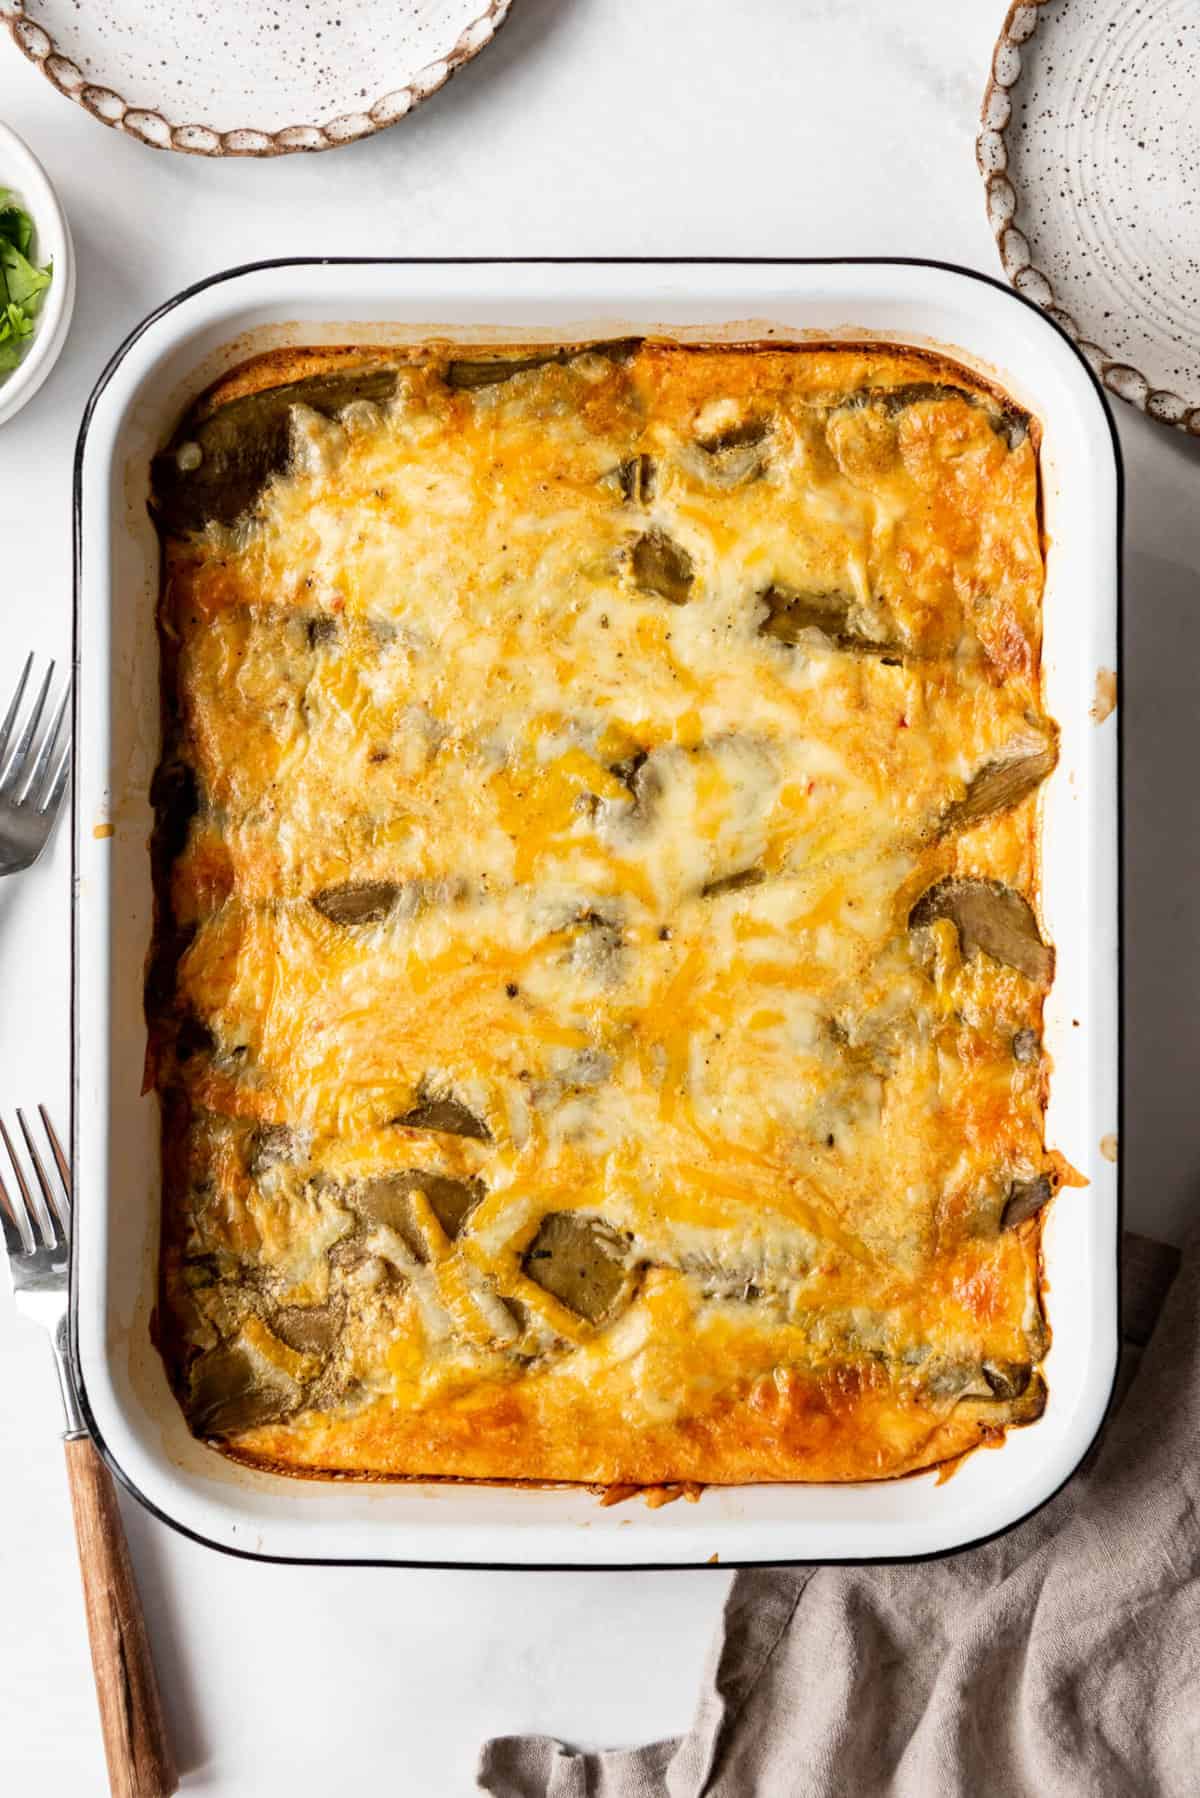 Baked chile rellenos casserole in a casserole dish.